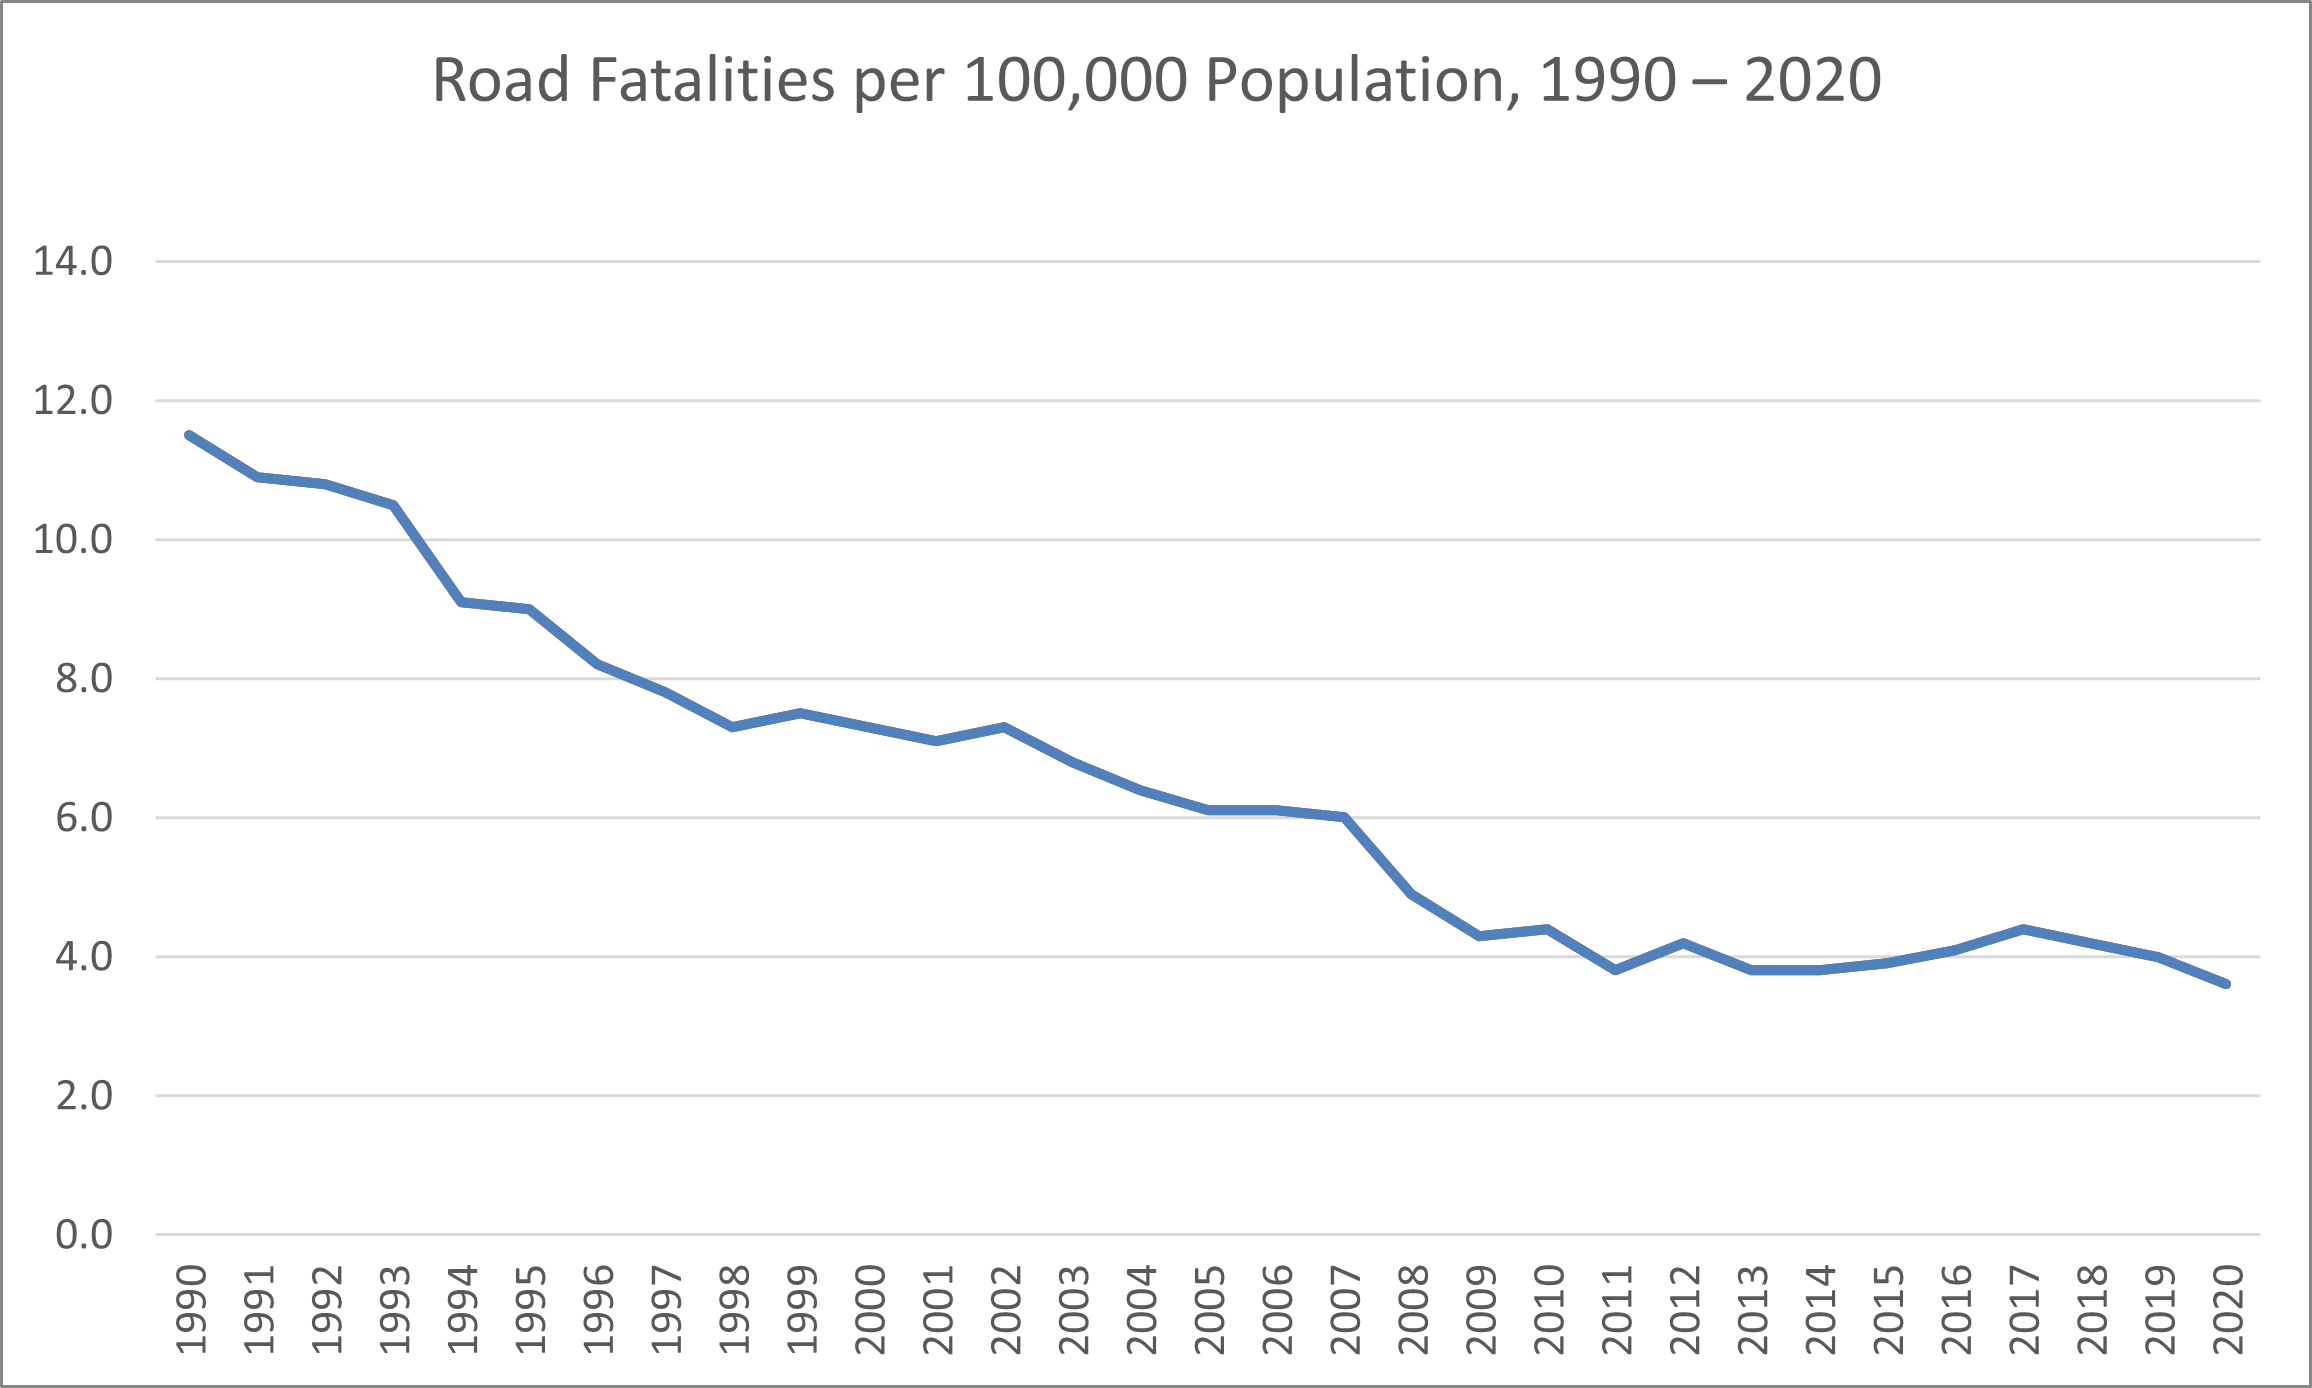 Fatality rates 1990 to 2020